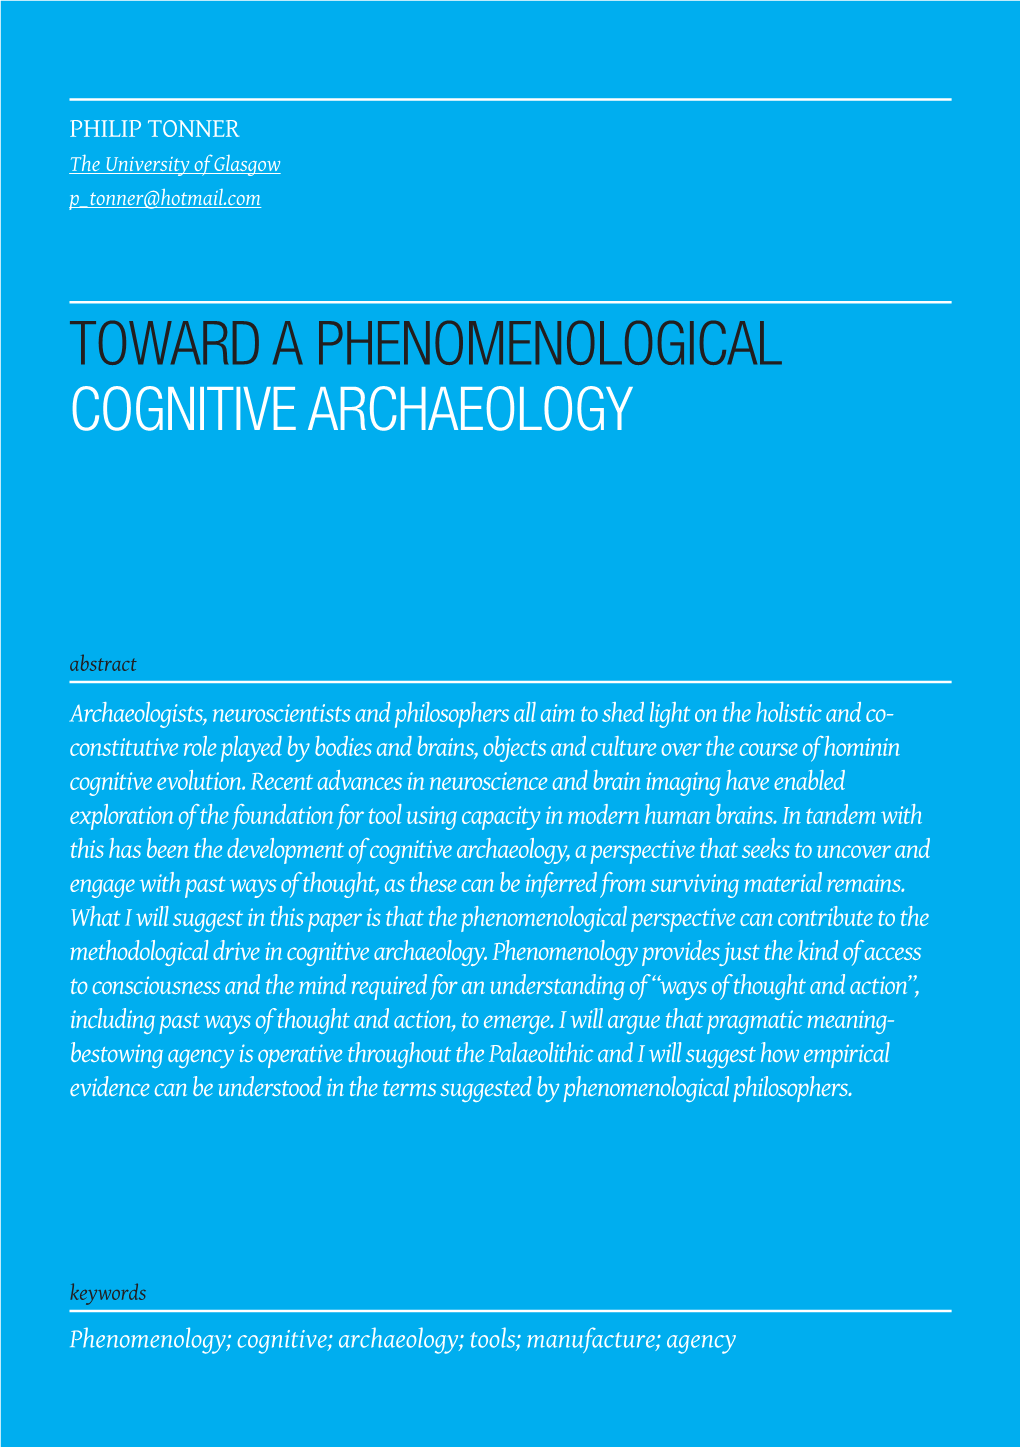 Toward a Phenomenological Cognitive Archaeology